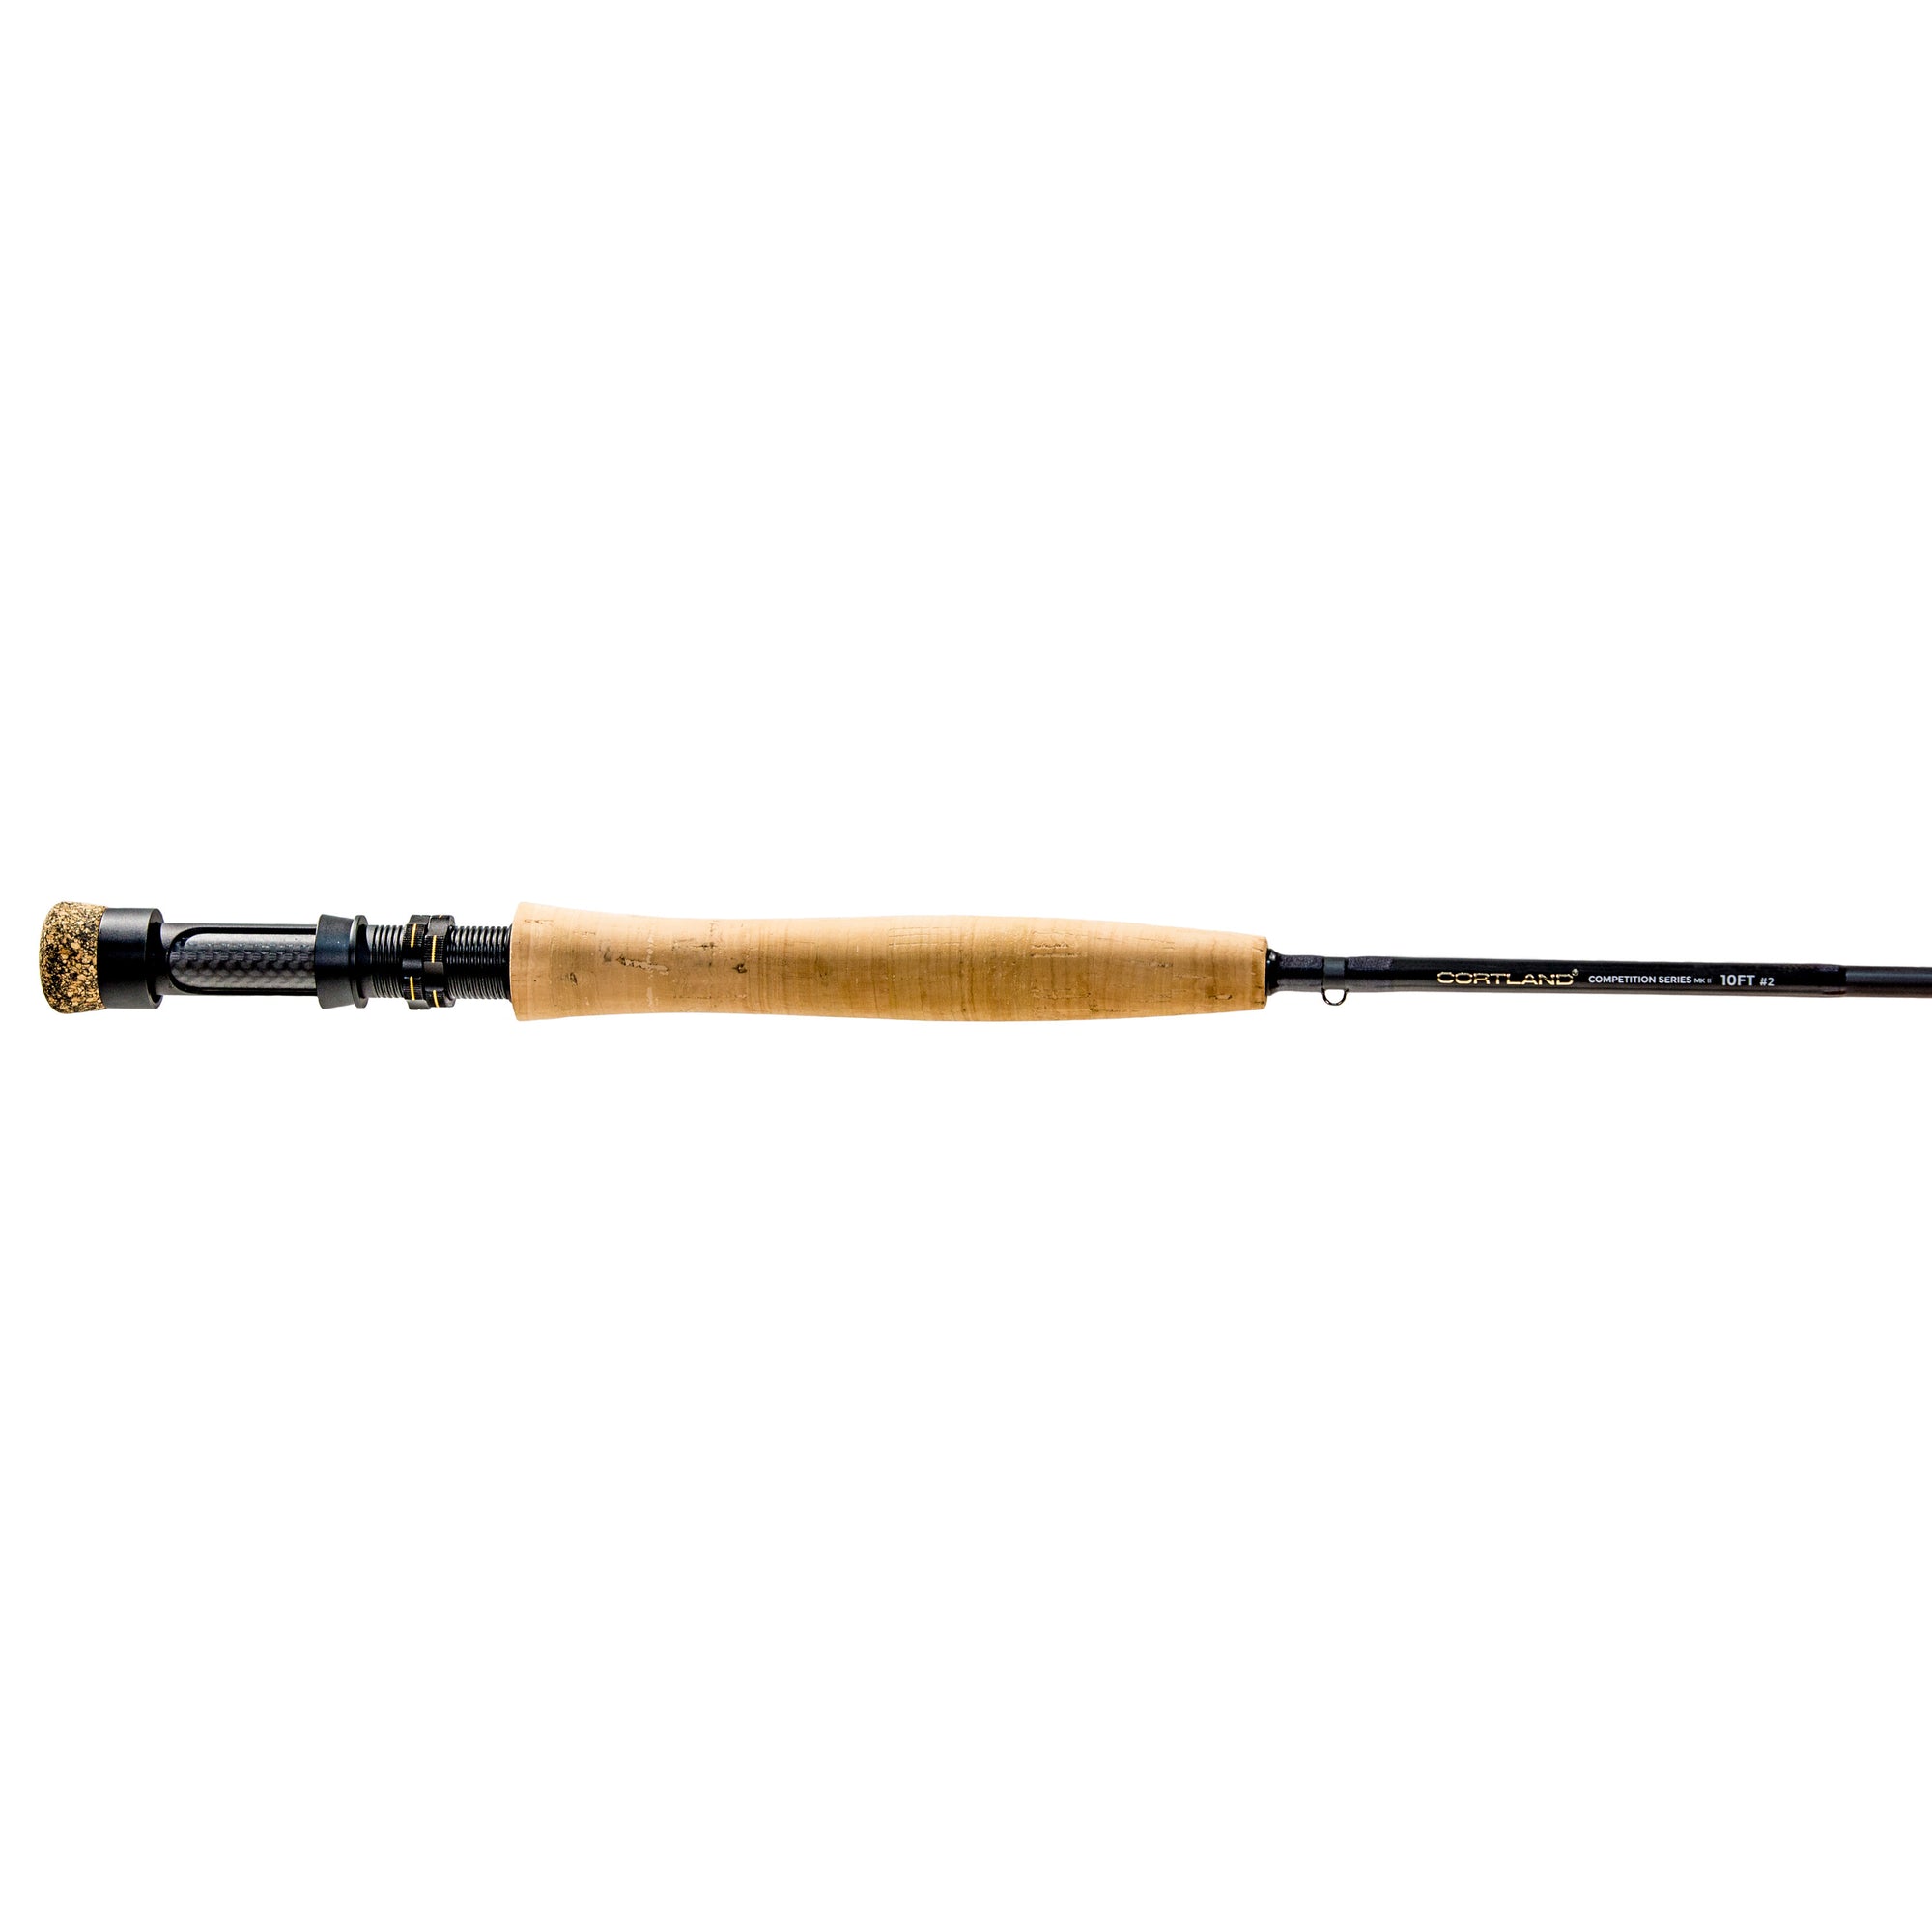 Cortland Sterling Mid Arbor Reel - 3-5 wt - The Fly Shack Fly Fishing